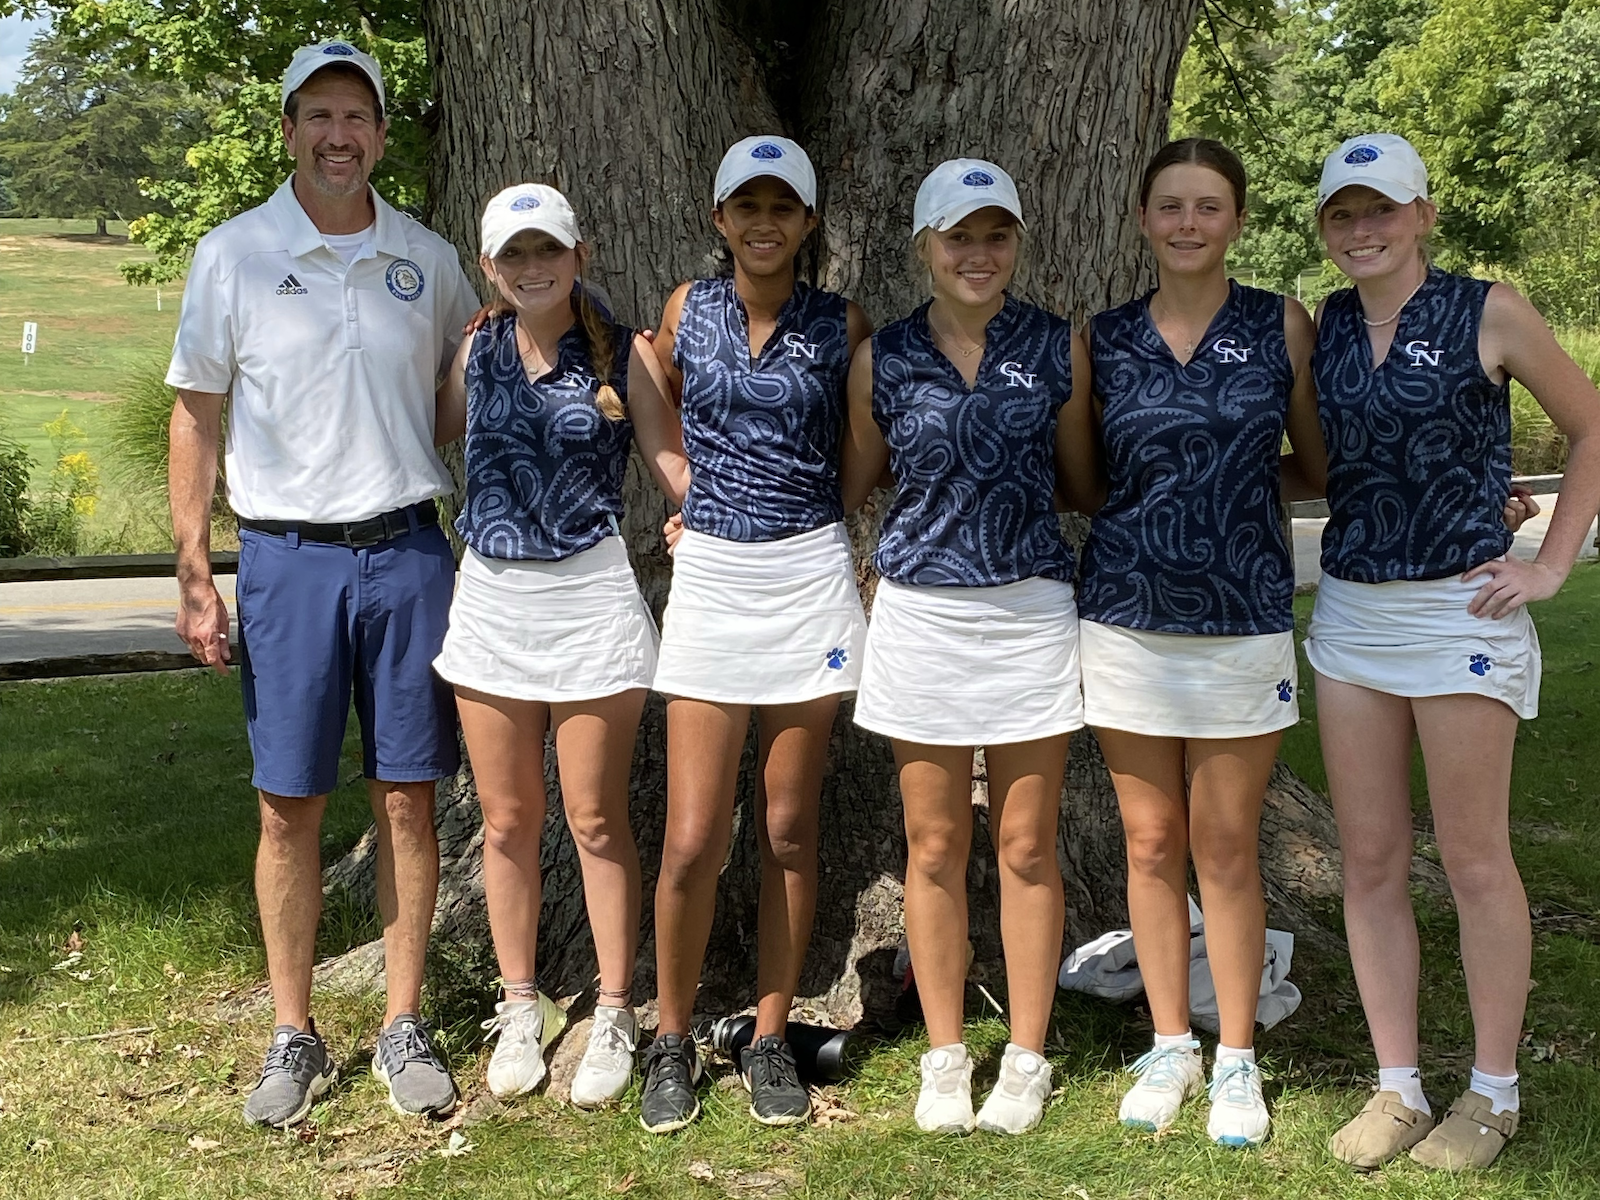 North wins girls golf Sectional tournament cover photo